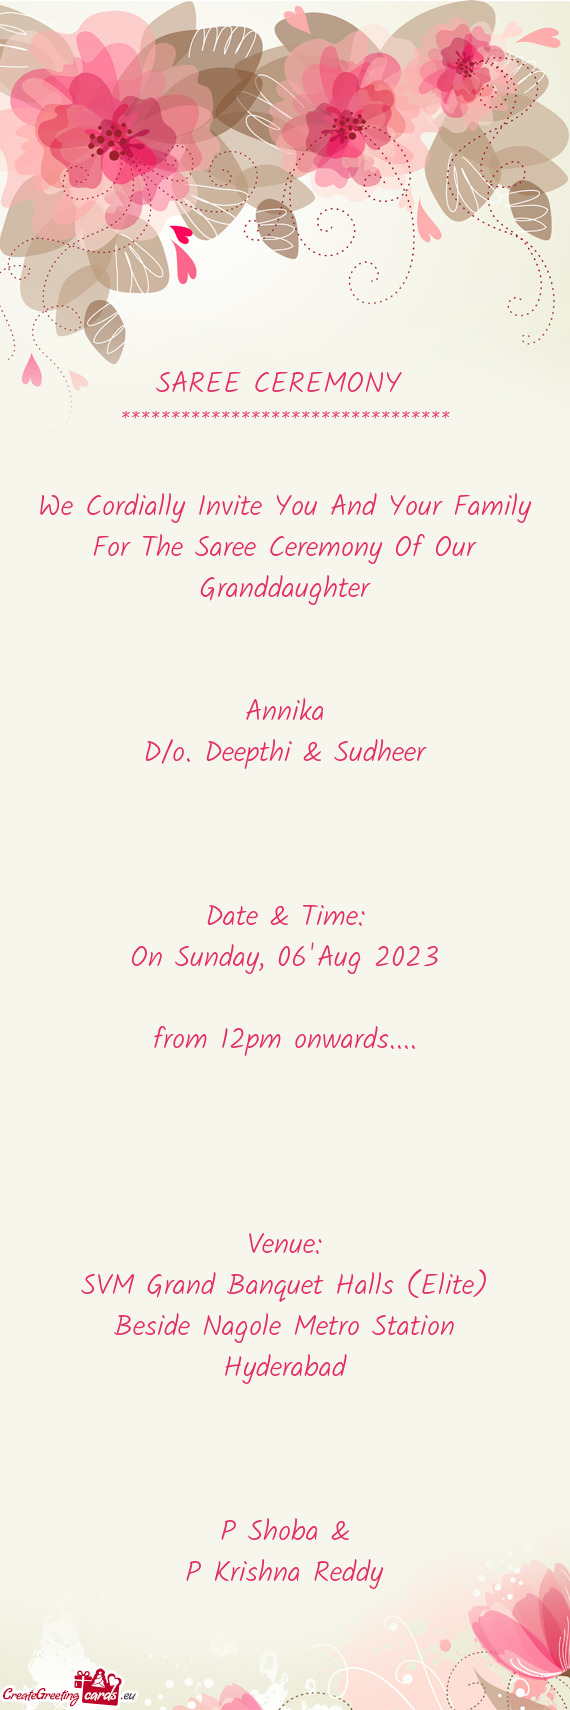 We Cordially Invite You And Your Family For The Saree Ceremony Of Our Granddaughter